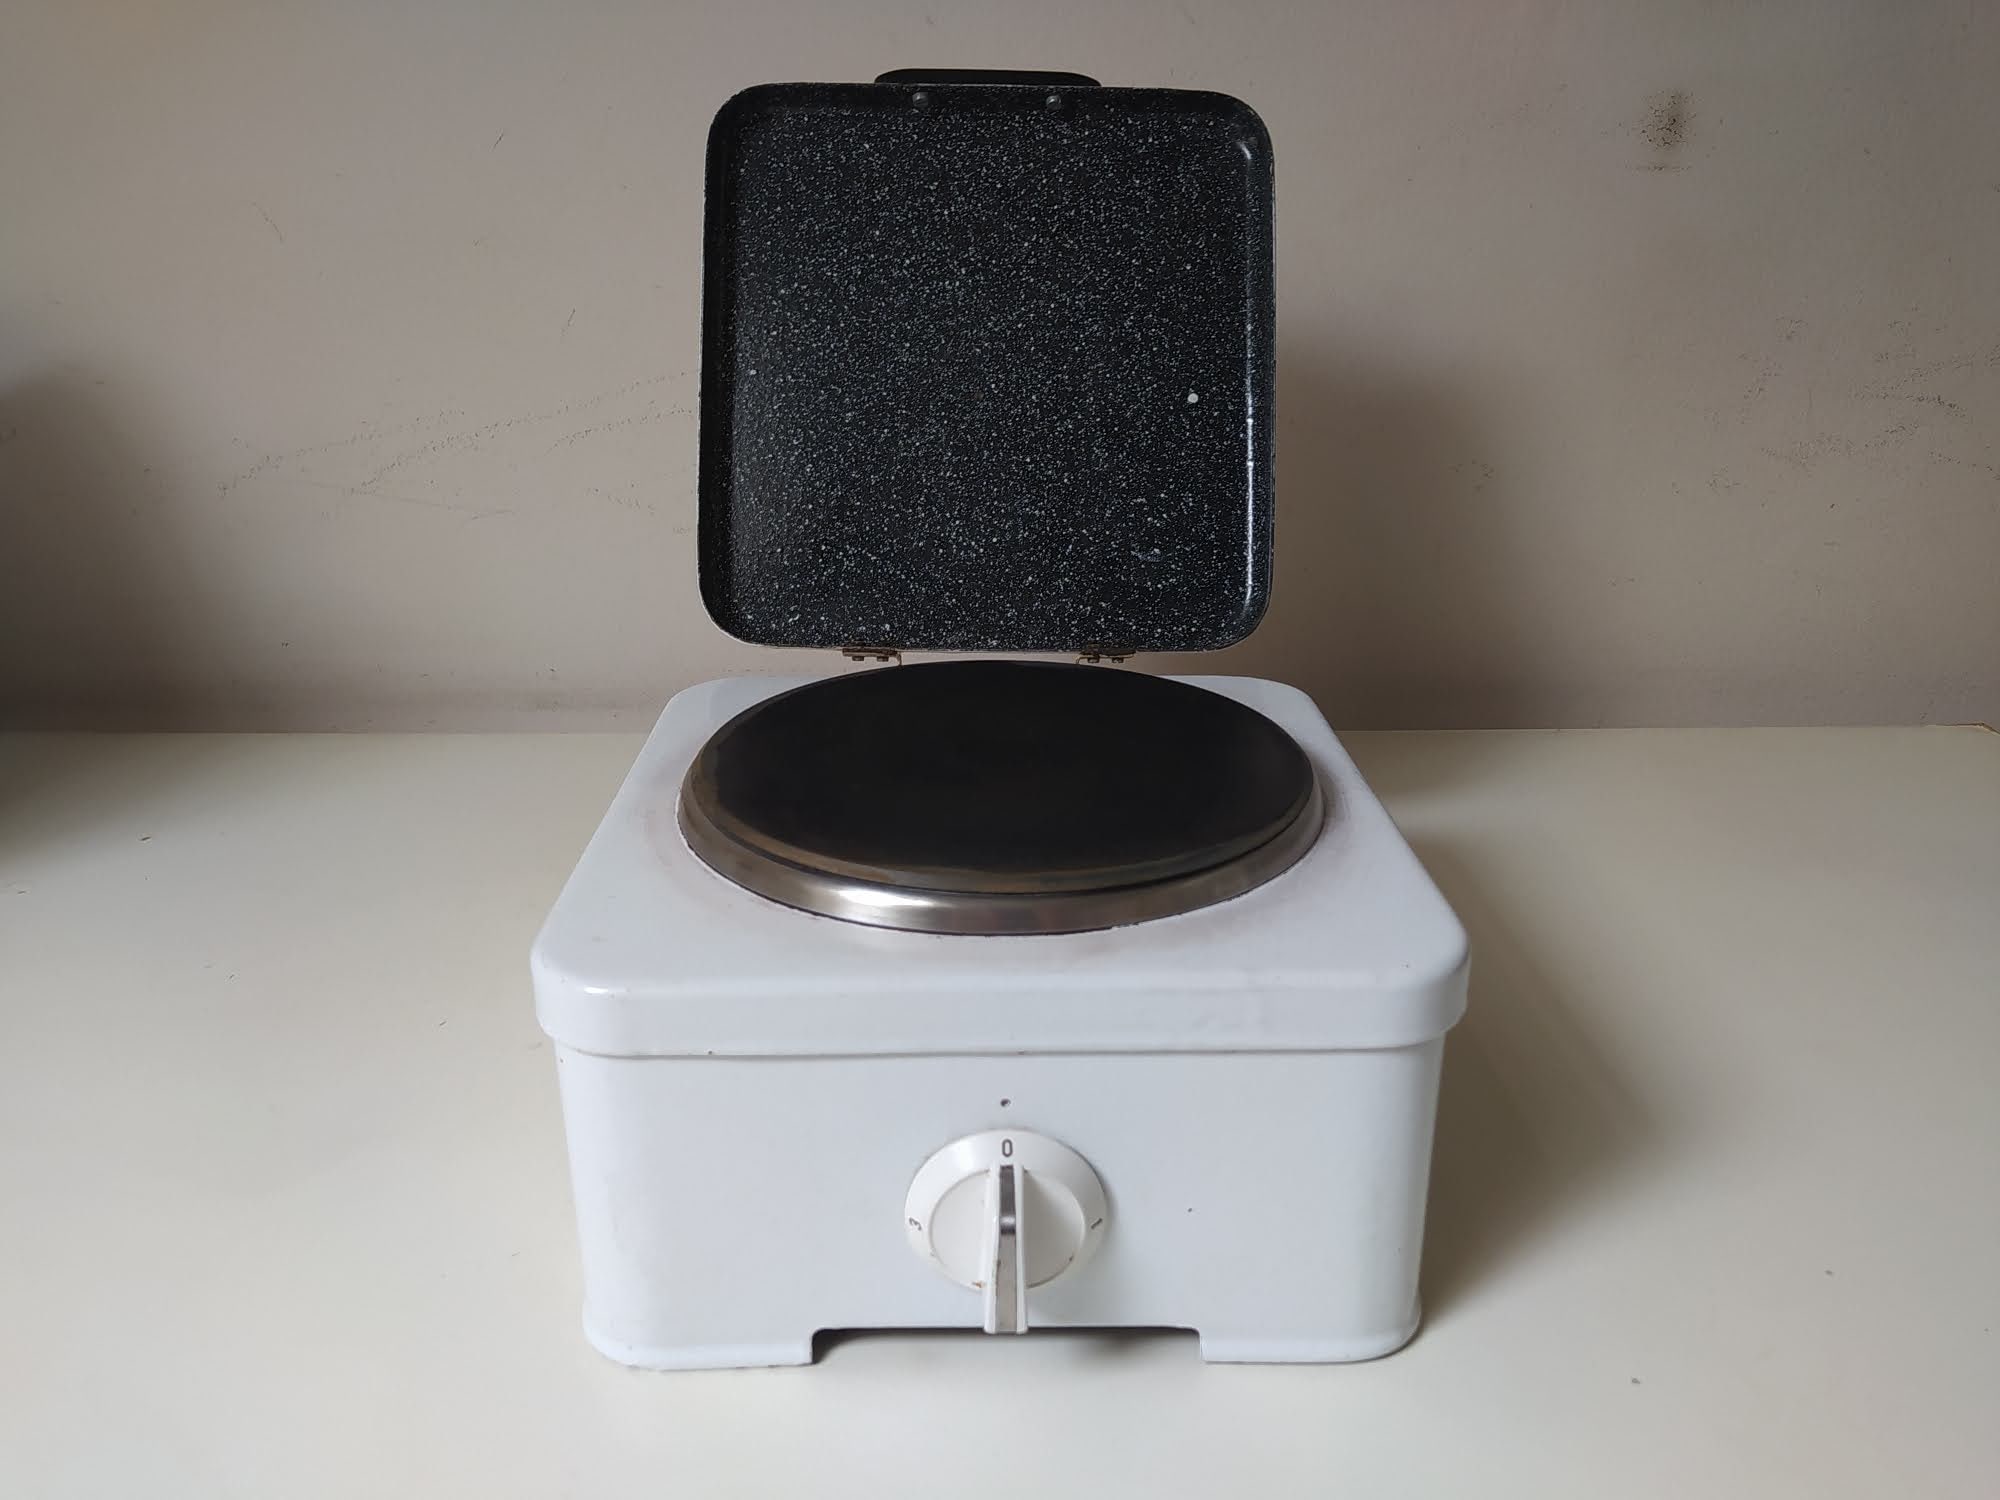 Micro Microwave Hot Plate Thermal Insulating Heat Stone Keeps Food Hot